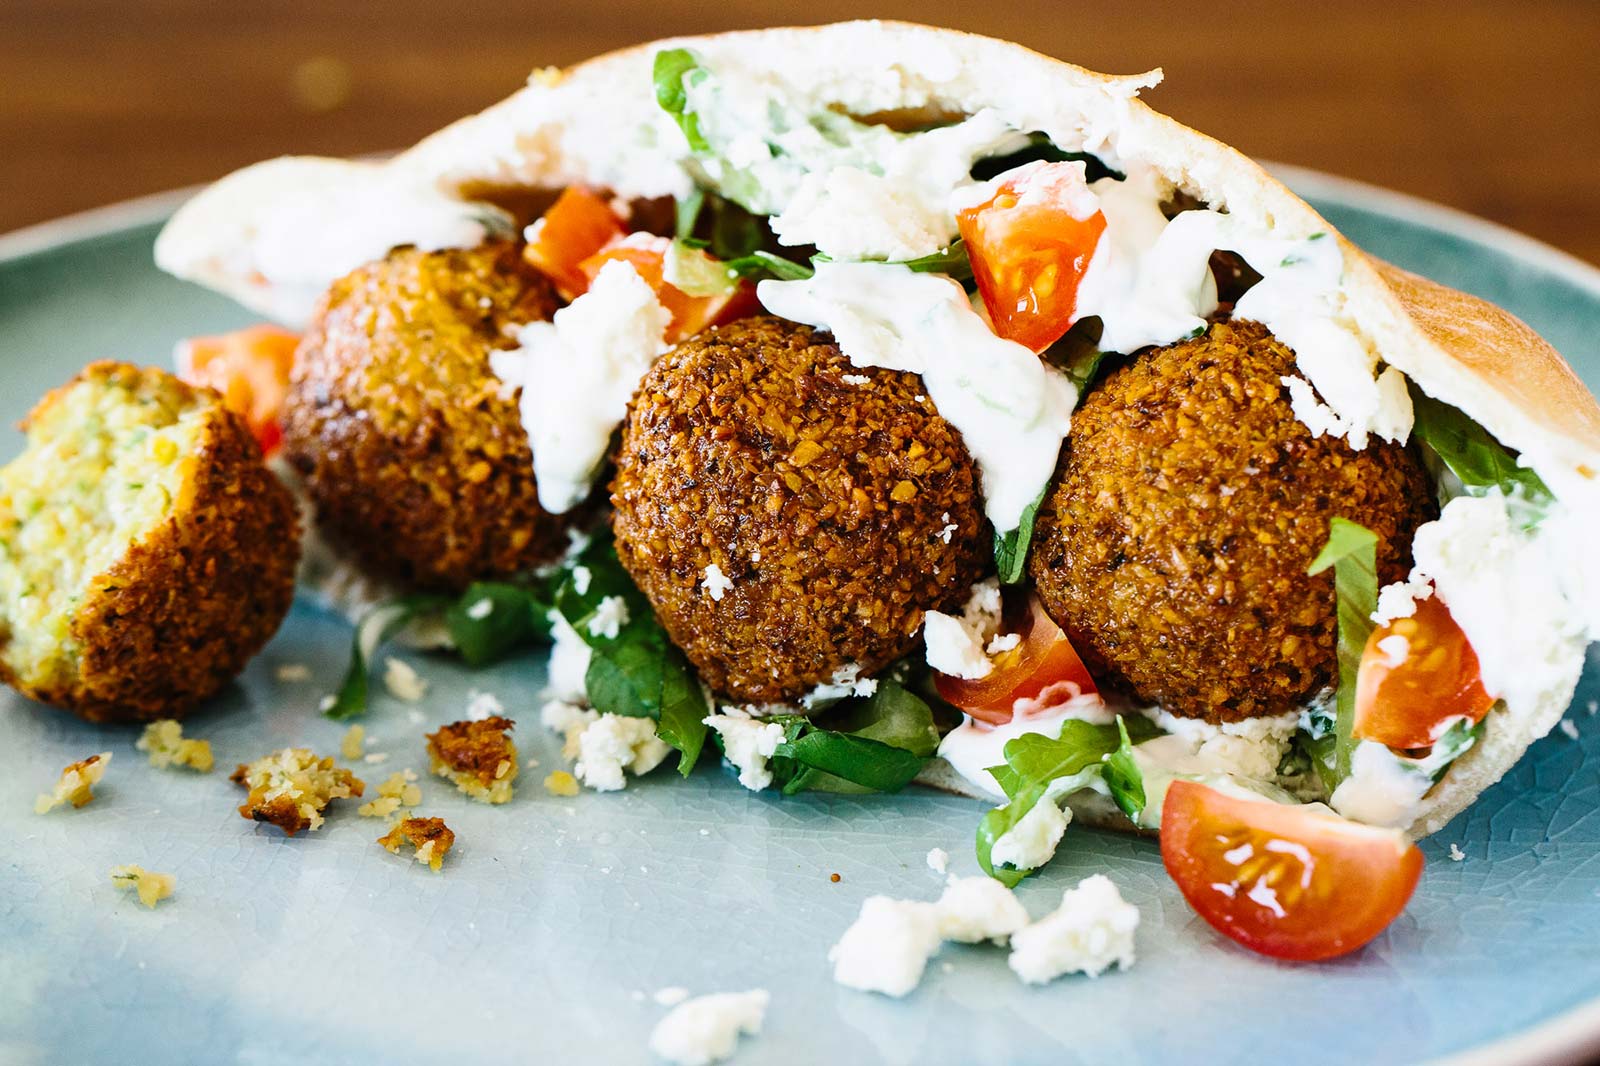 Say “Yuck” Or “Yum” to These Foods and We’ll Determine Your Exact Age Falafel